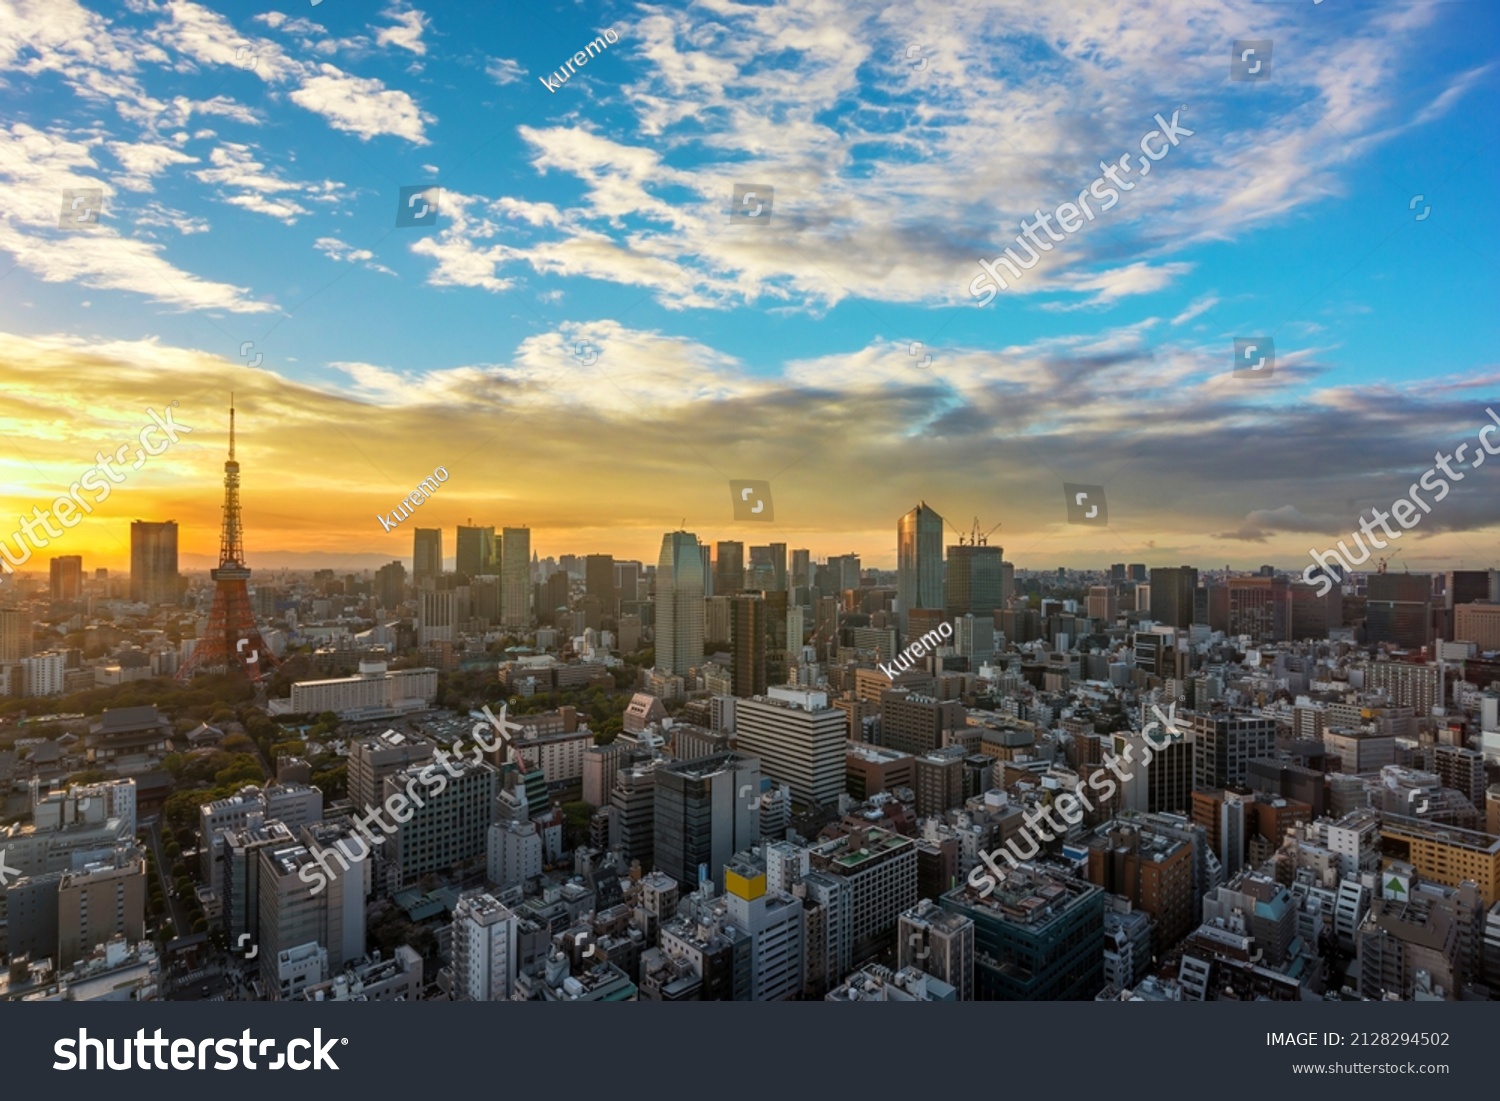 Bird's-eye view of a sunset cityscape depicting the Tokyo tower and Roppongi Hills skyscrapers above the buildings of Shibadaimon district at golden hour. #2128294502